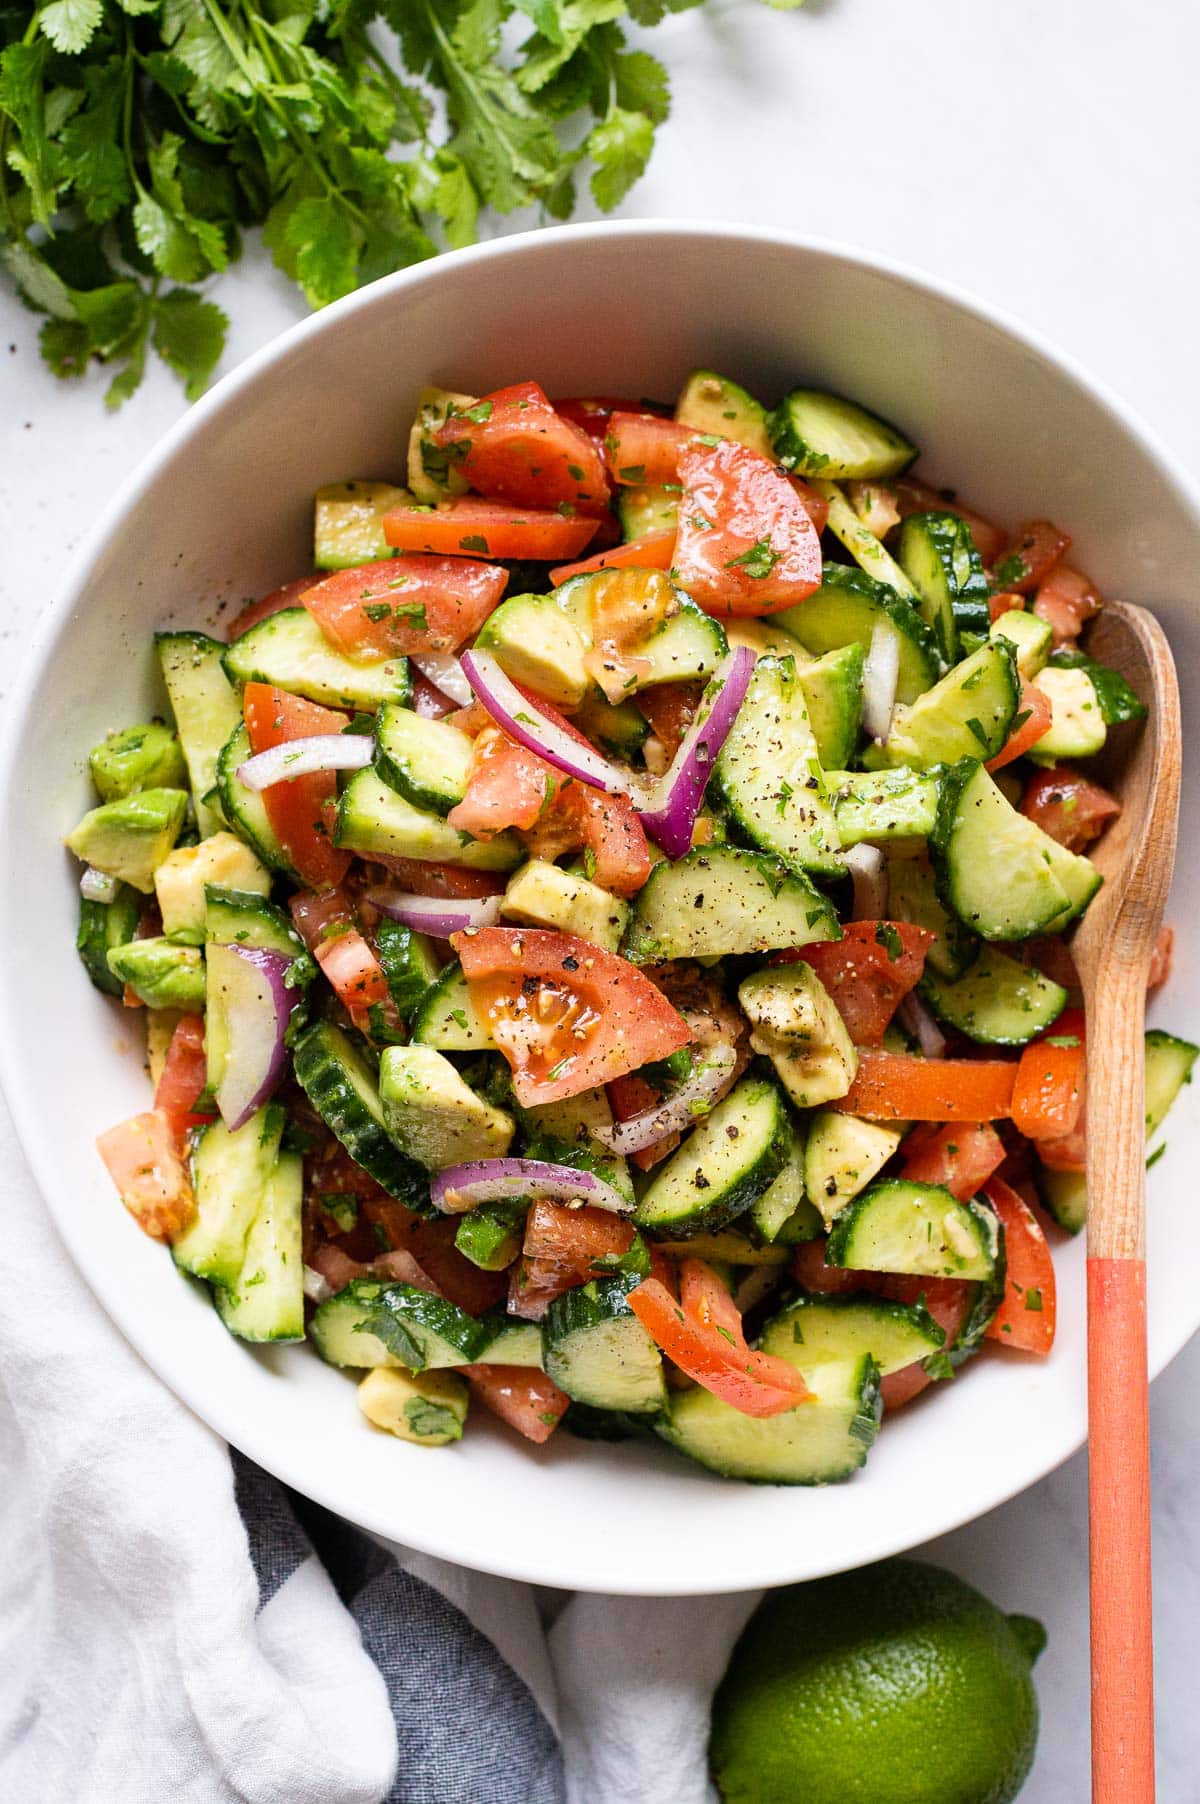 Cucumber tomato avocado salad in white bowl with wooden spoon.